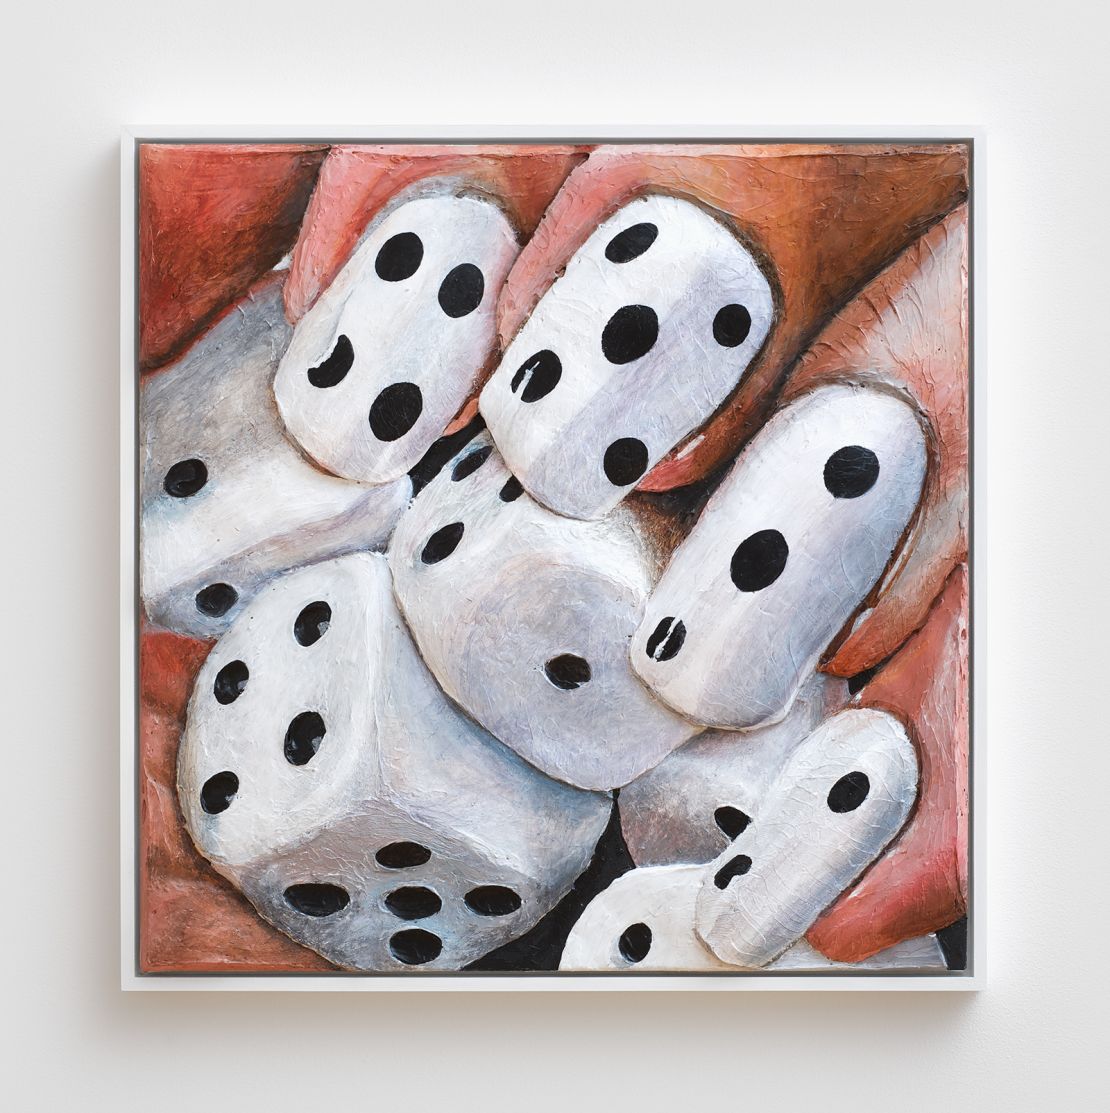 "Dice Nails" (2014) by Gina Beavers. Courtesy of the artist.